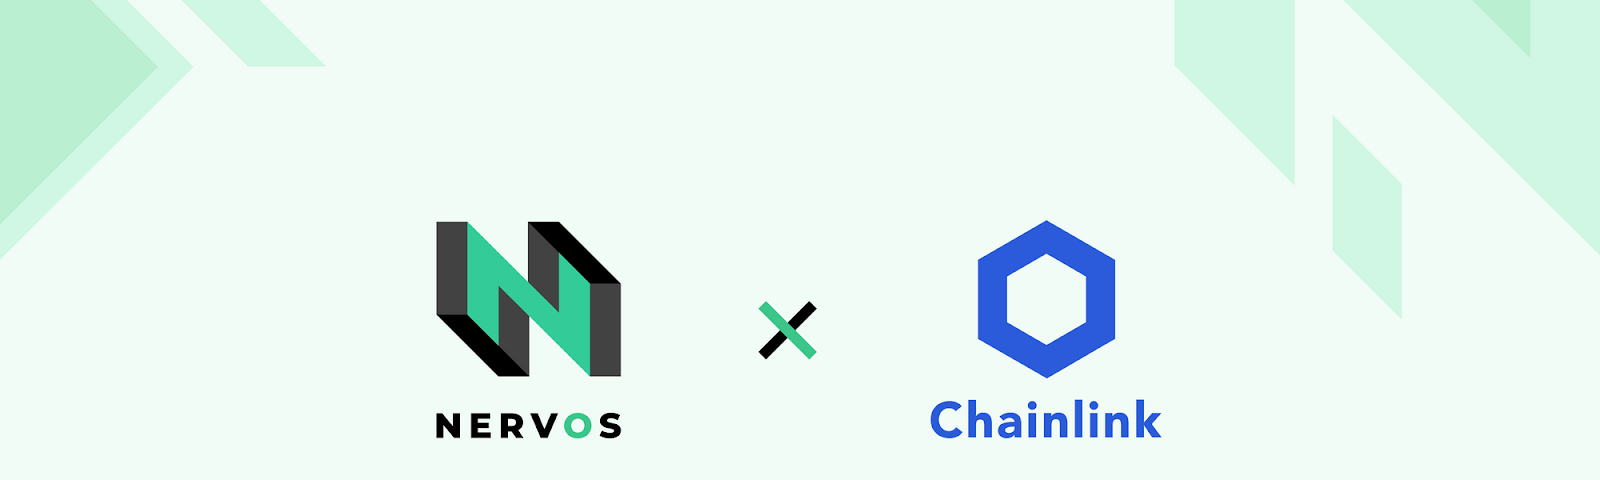 Logos for Nervos and Chainlink